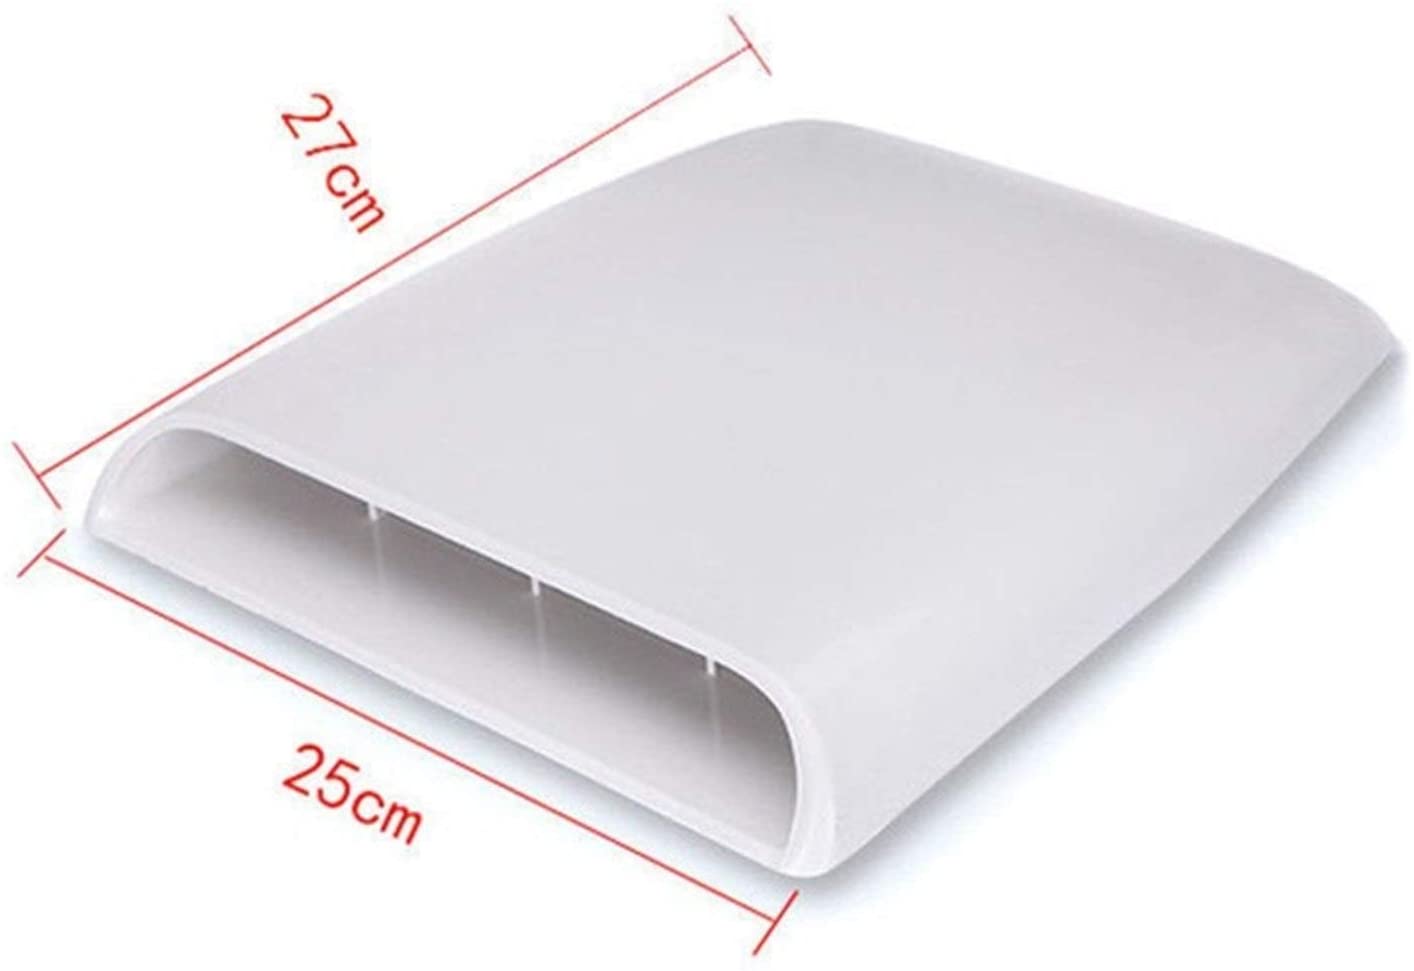 MAMINGGANG Mmgang Decor Base Cover Car Roof Decorative Intake Hood Scoop Bonnet Be Applicable (Color : White) (White)